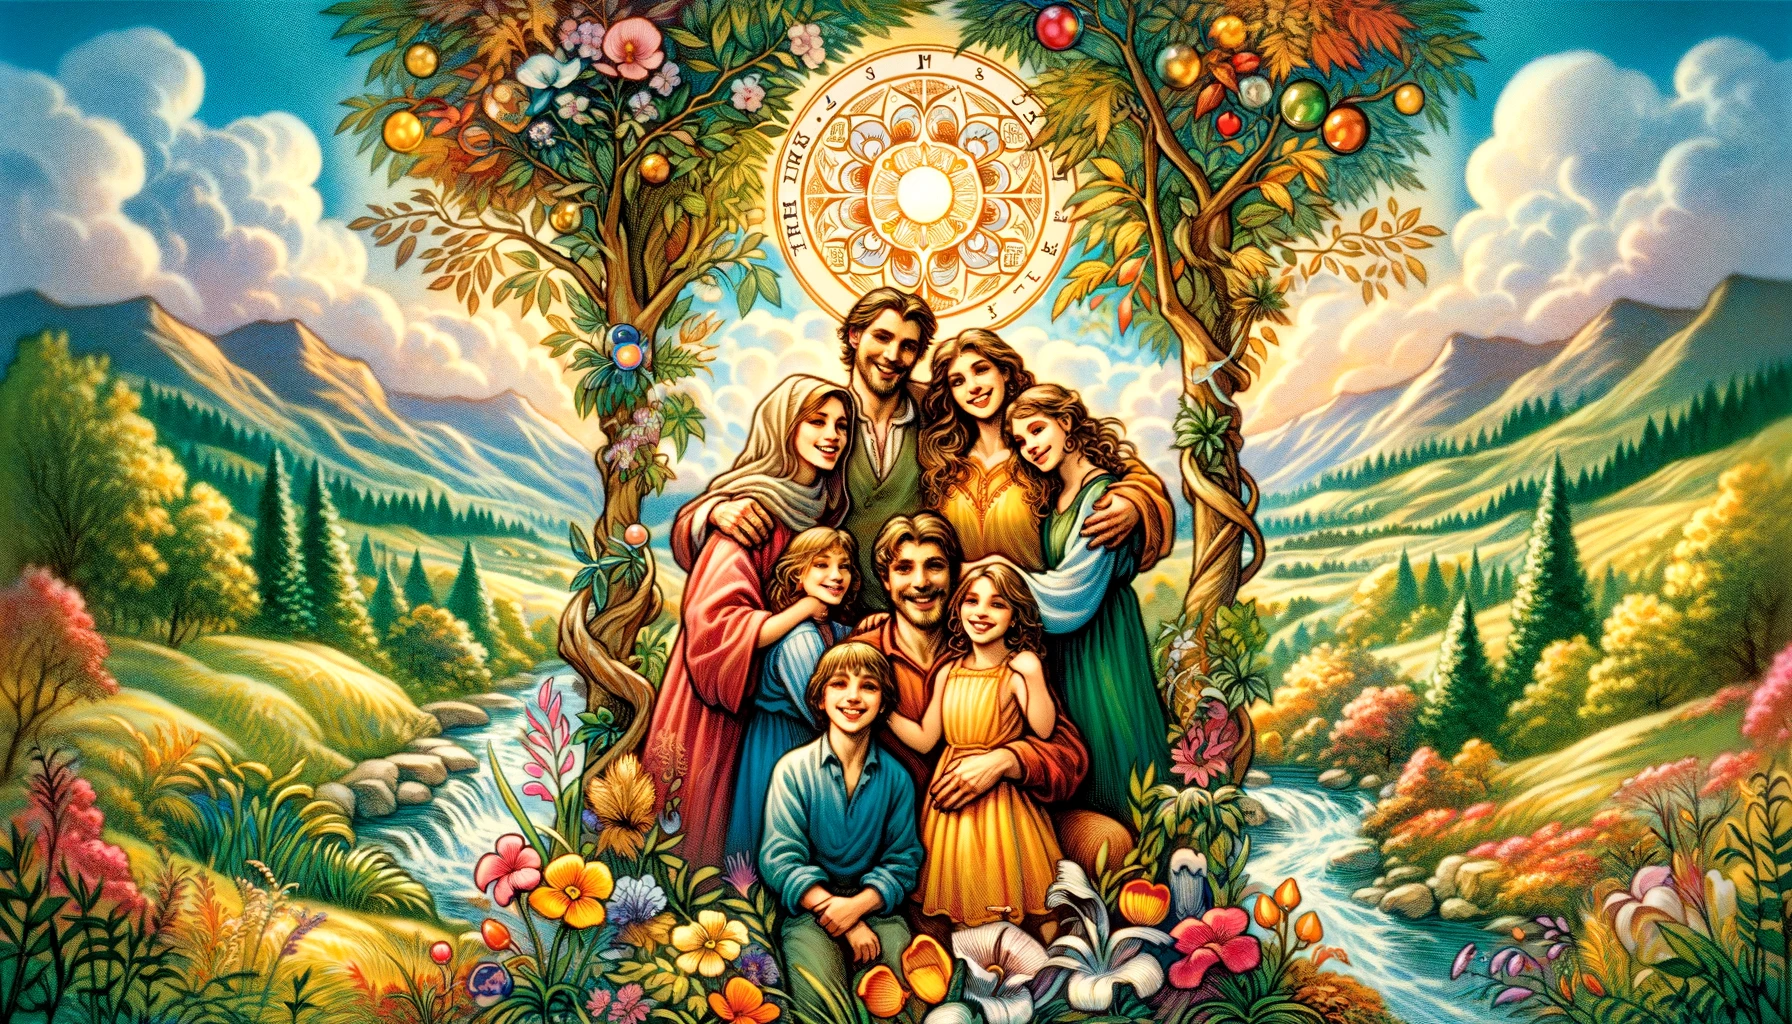 An image capturing the essence of the Ten of Cups tarot card a picturesque scene of a loving family surrounded by a lush landscape. The family is de